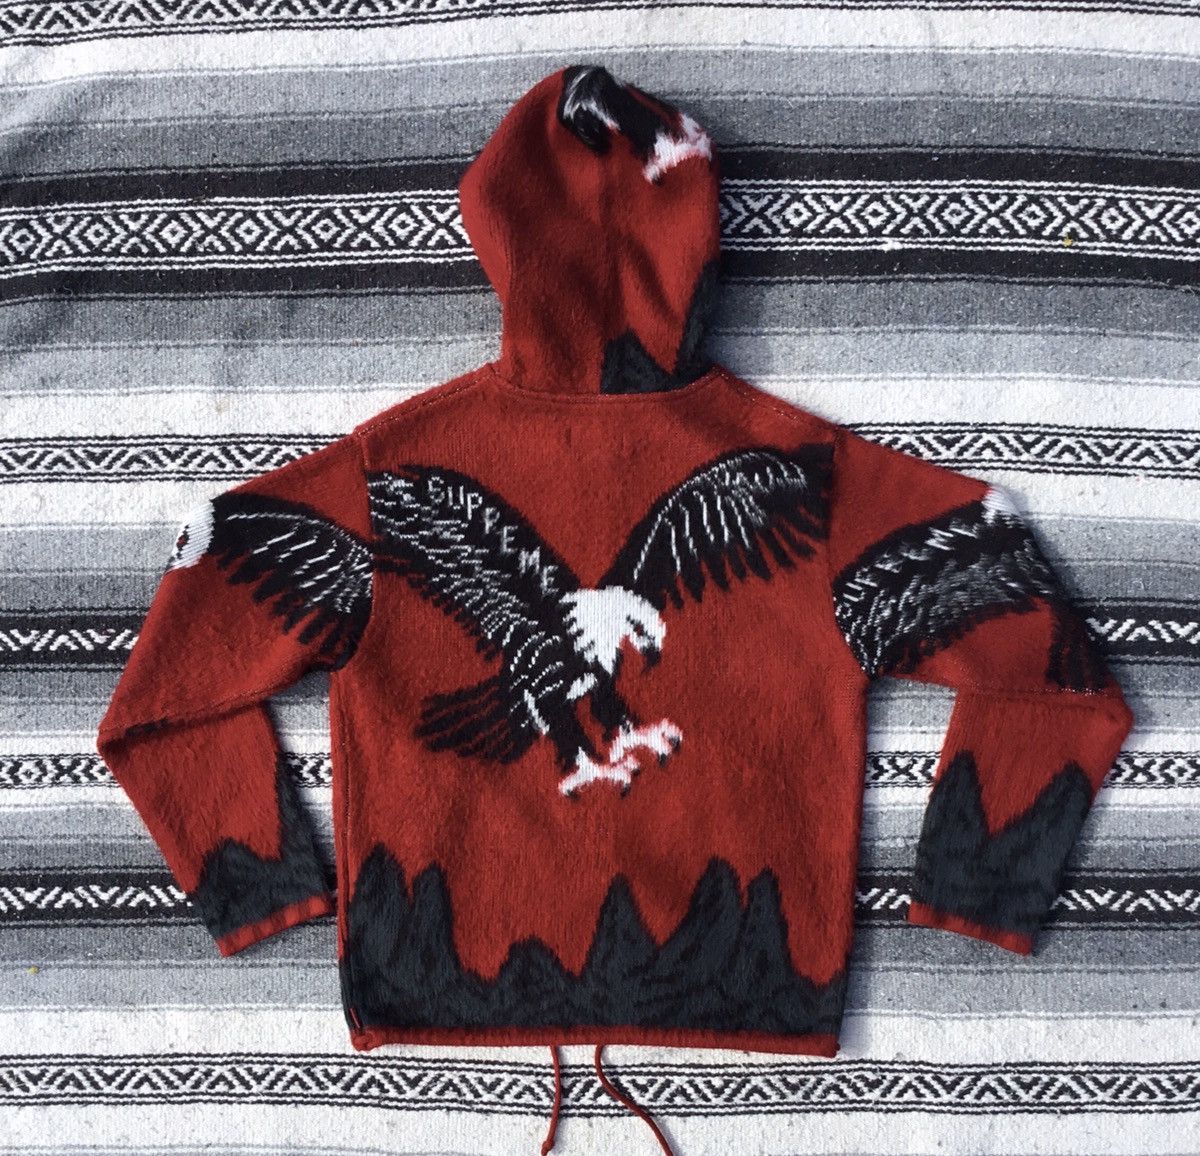 Supreme SS16 Supreme Eagle hooded zip up sweater Size US S / EU 44-46 / 1 - 2 Preview